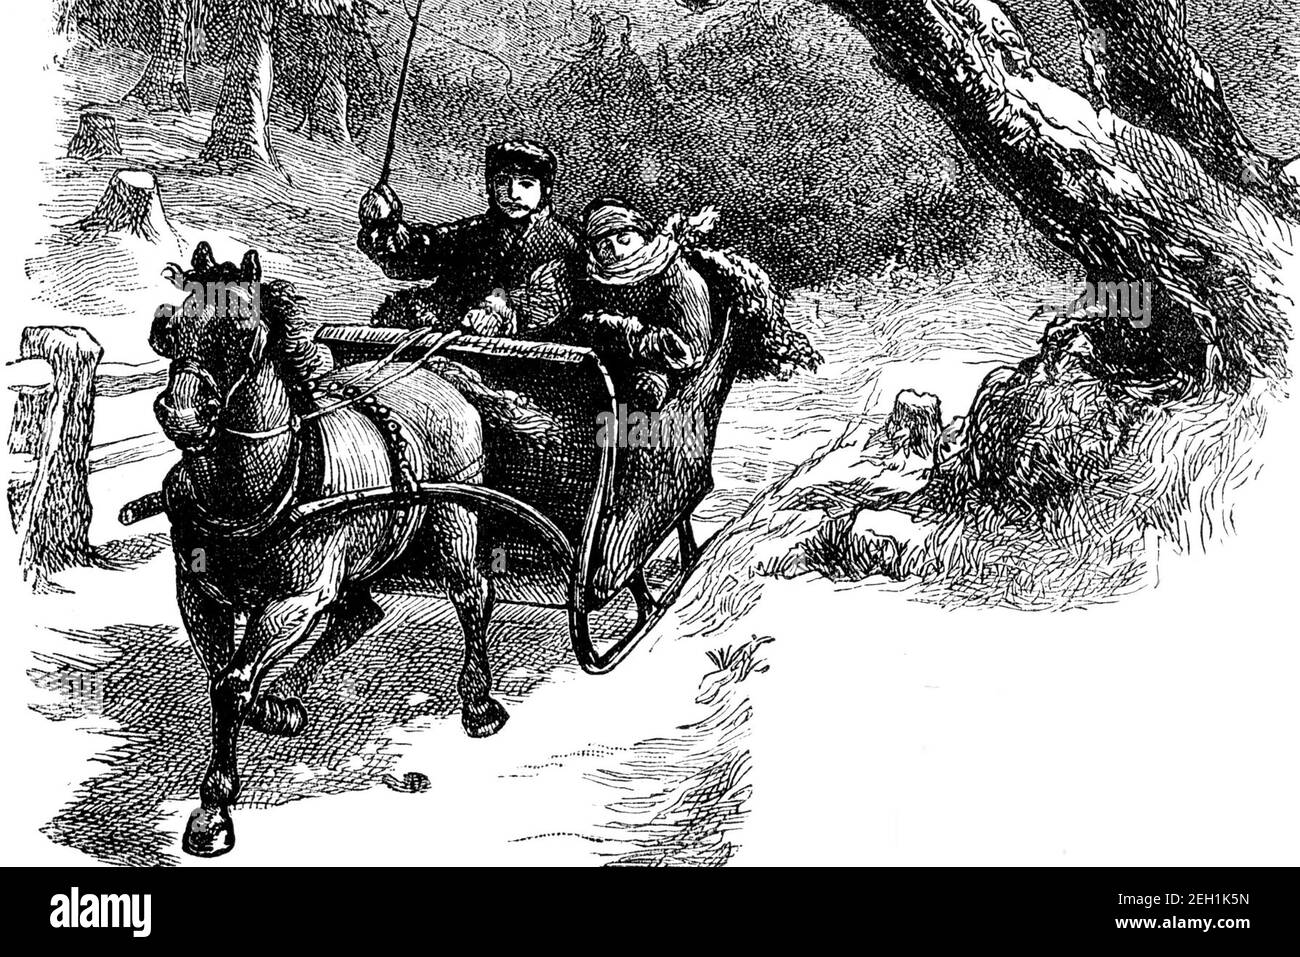 HORSE-DRAWN CUTTER-STYLE SLEIGH -19th century illustration Stock Photo